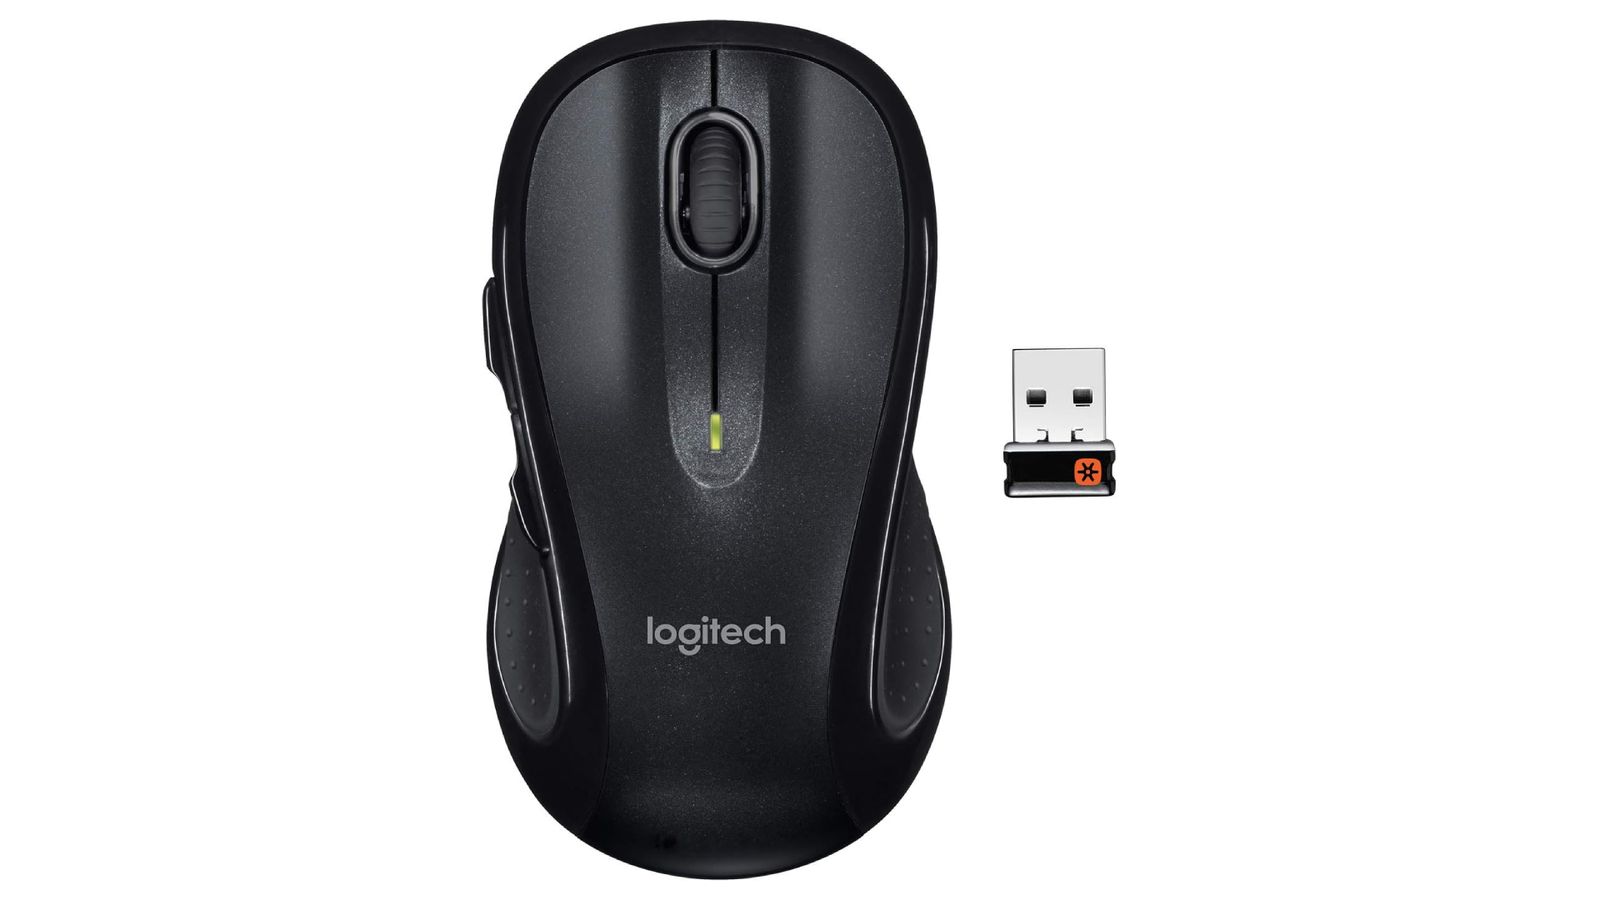 Logitech M510 product image of an all-black wireless mouse next to a USB stick.